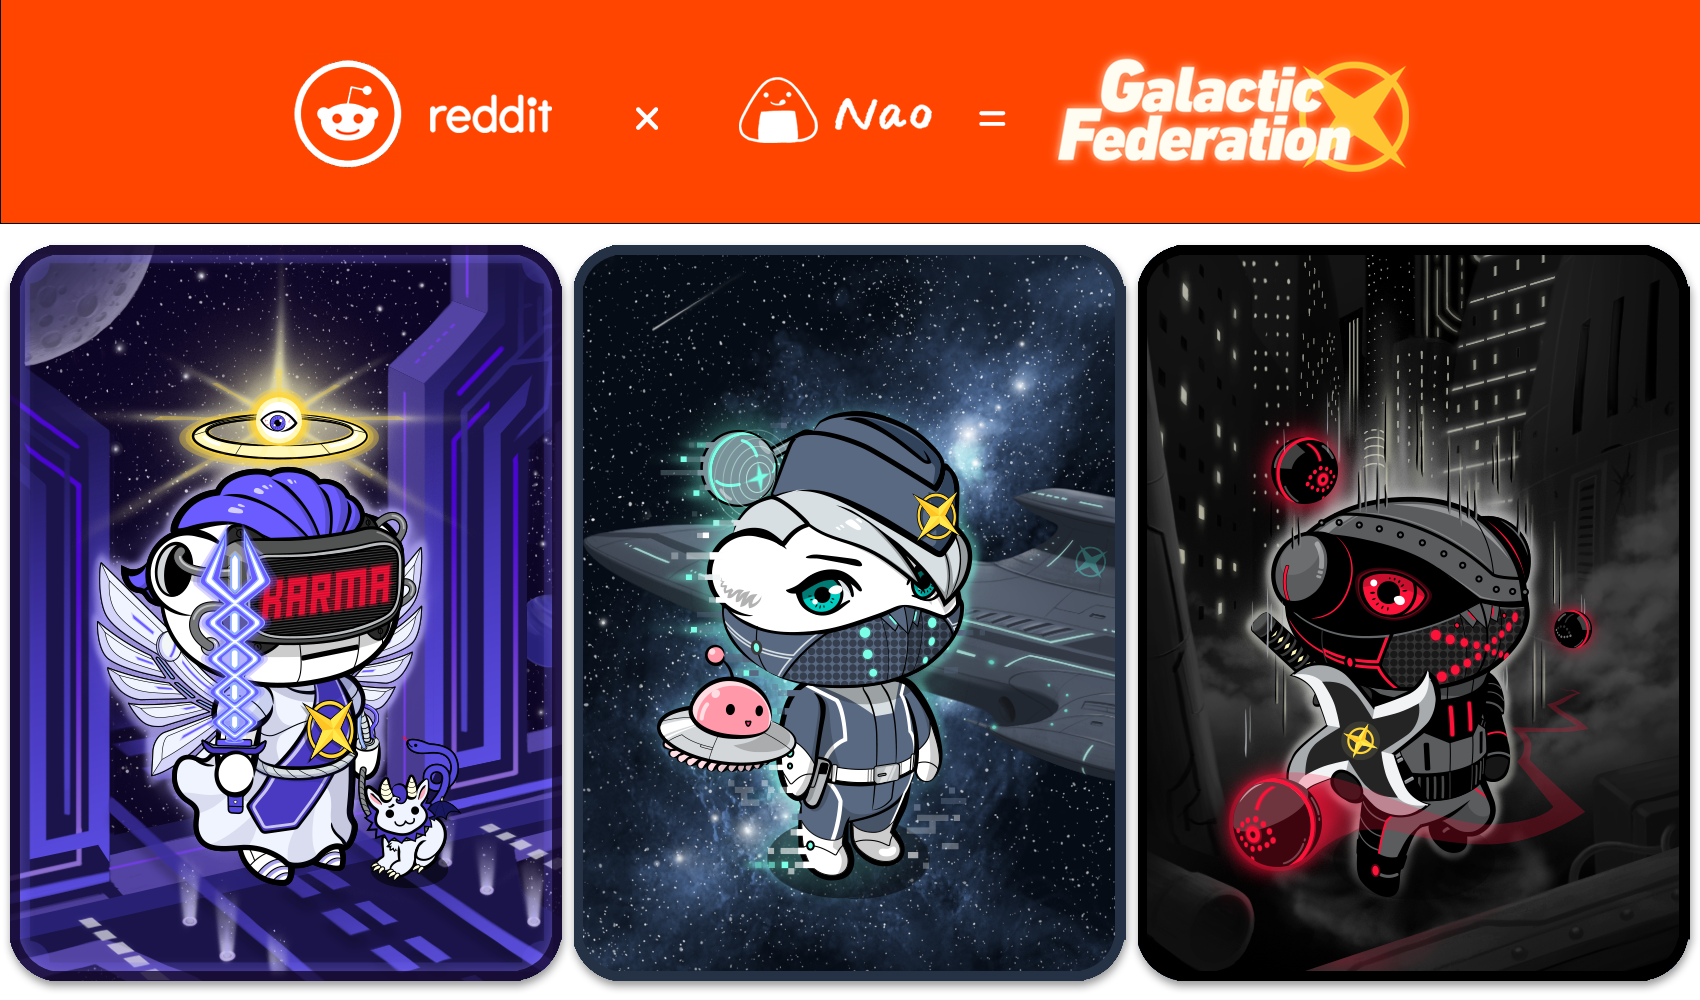 @Reddit’s creator collection of Collectible Avatars 3rd gen